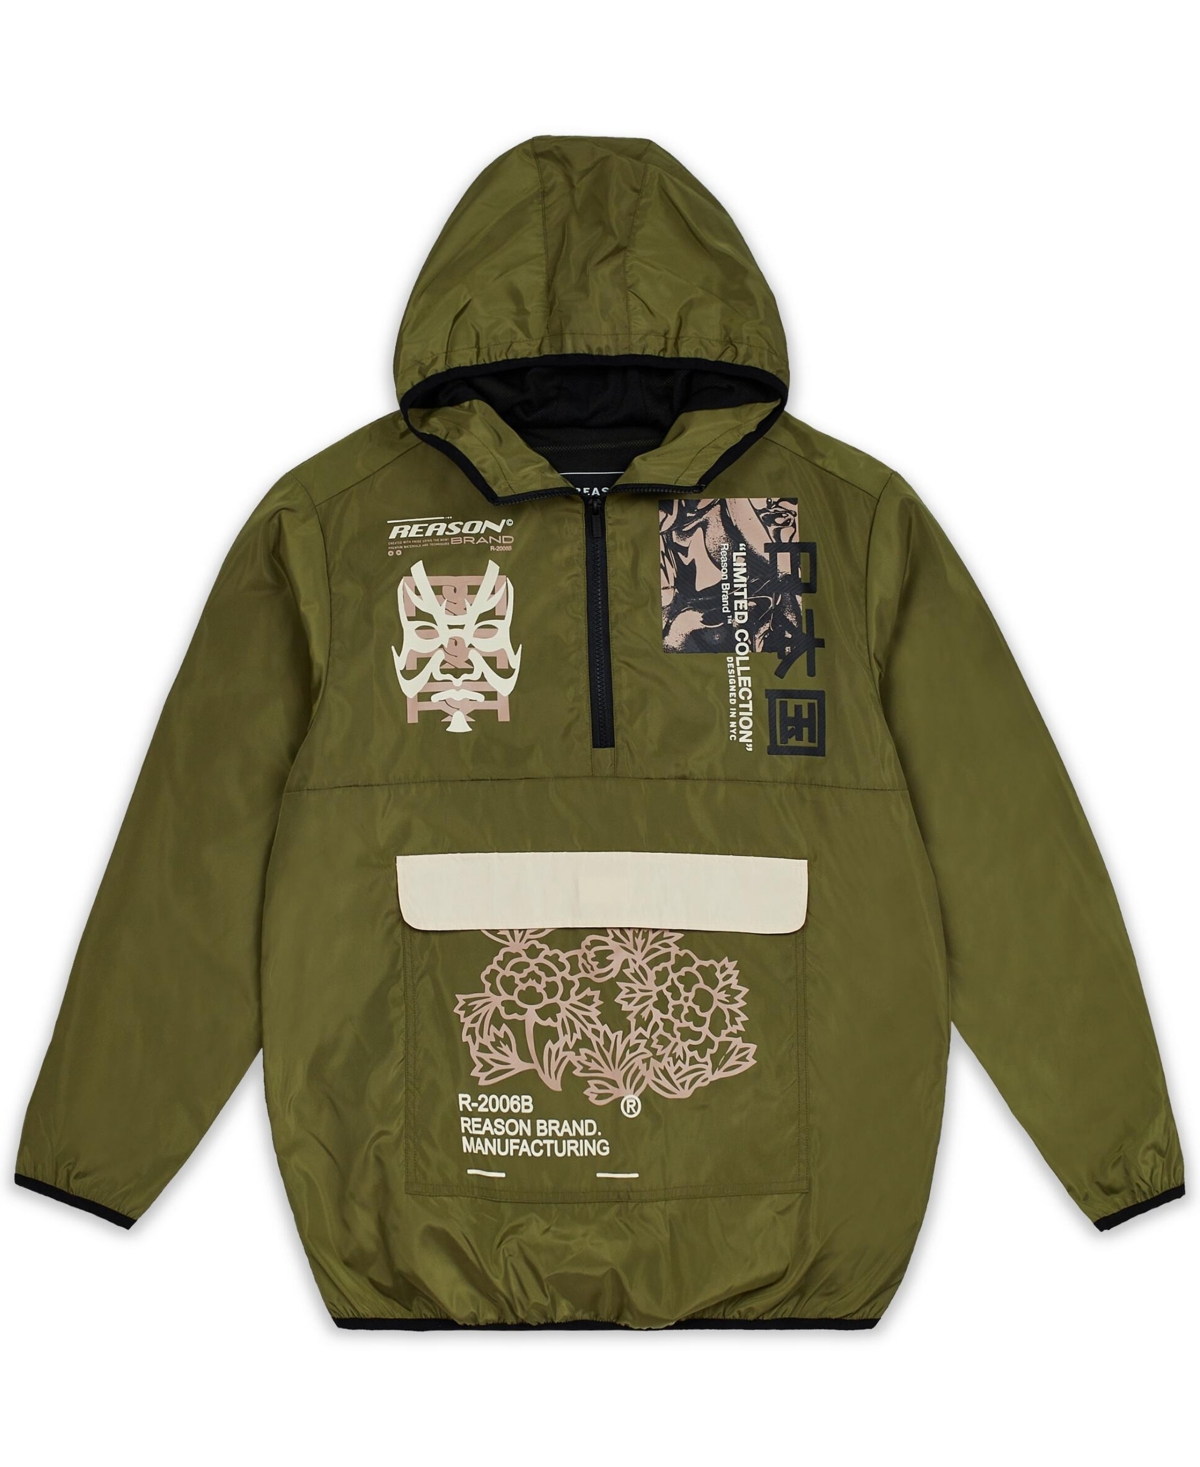 Reason Men's Limited Hooded Anorak Jacket In Burnt Olive